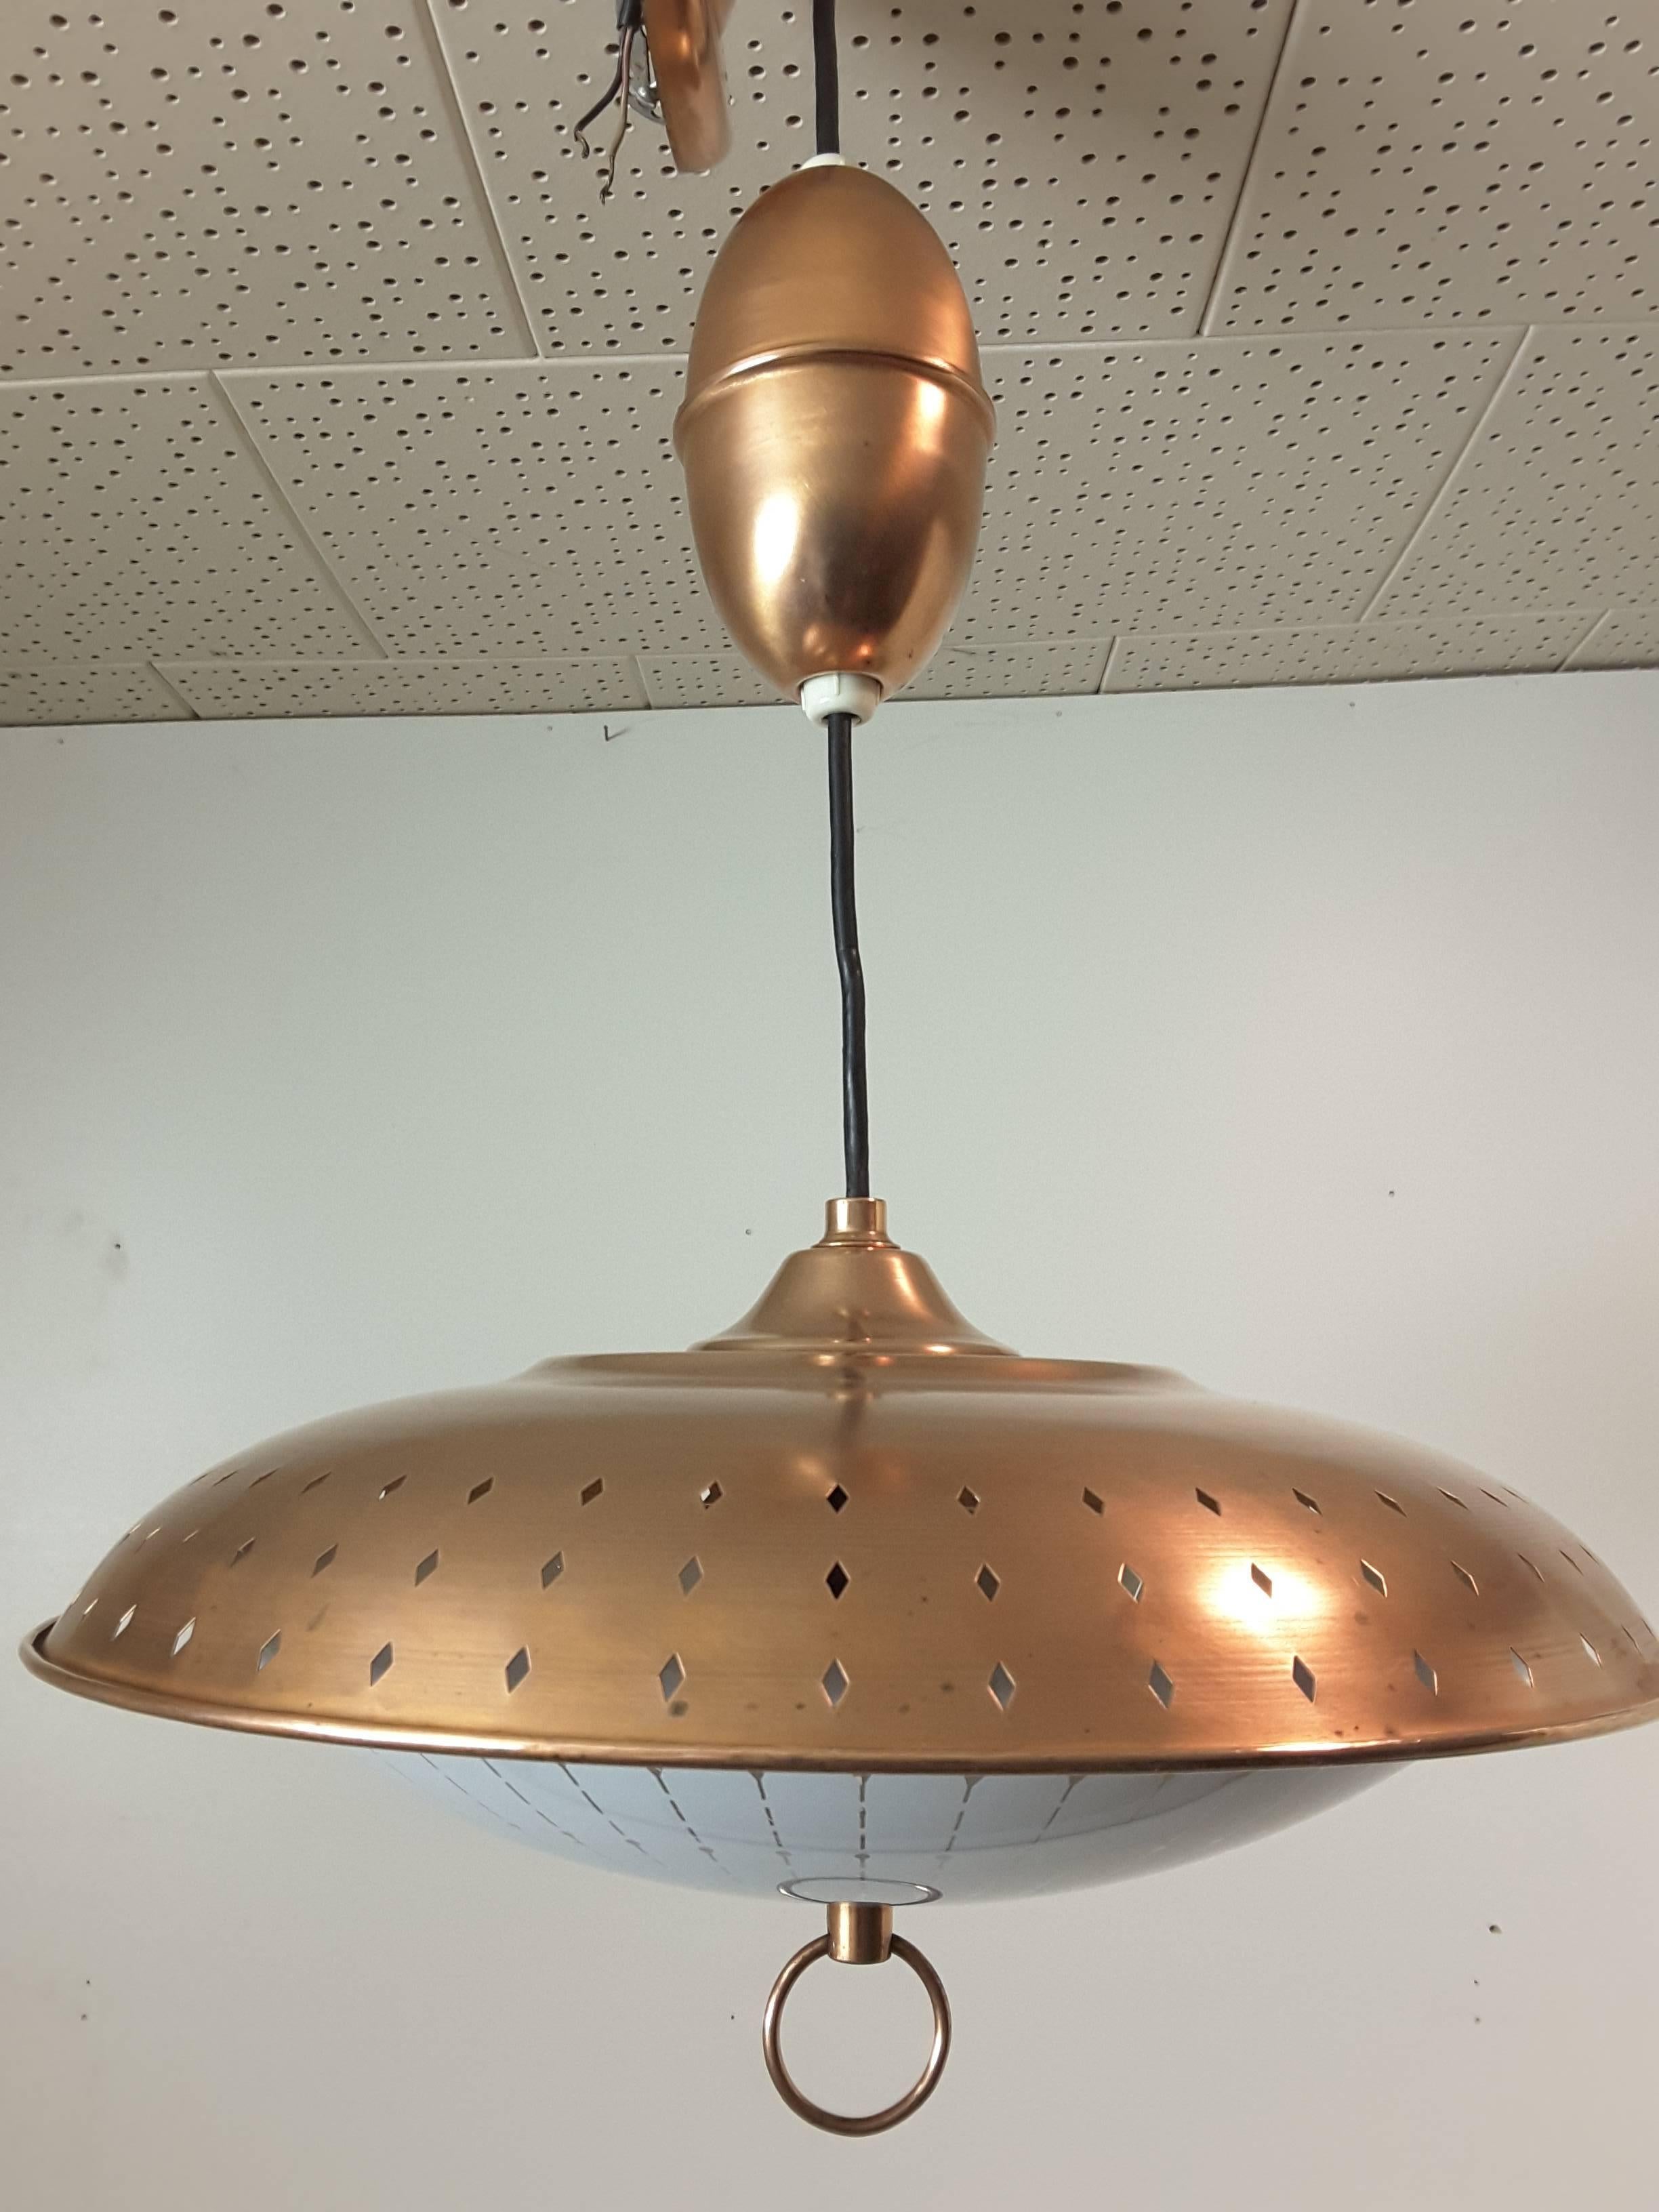 Mid-Century Gerald Thurston Solid Copper "Egg Pendant" retractable light fixture by Lightolier, circa 1950-1960's. The fixture is done in solid copper, with punched diamond shaped cut-outs for light on the top. The underside is a glass